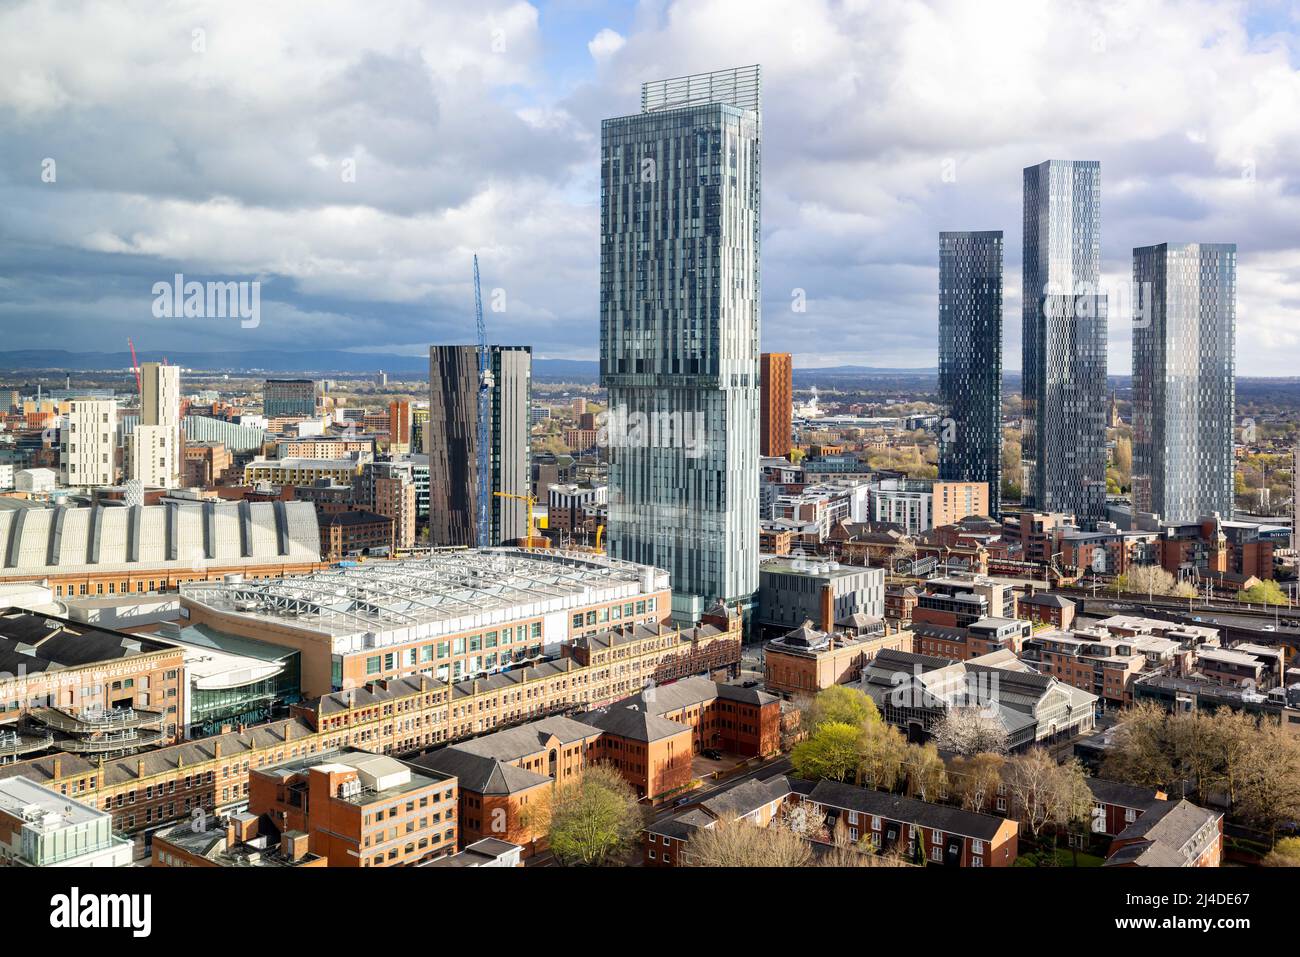 Manchester views. Beetham tower, Deansgate (centre) and Deansgate Square (right). Stock Photo